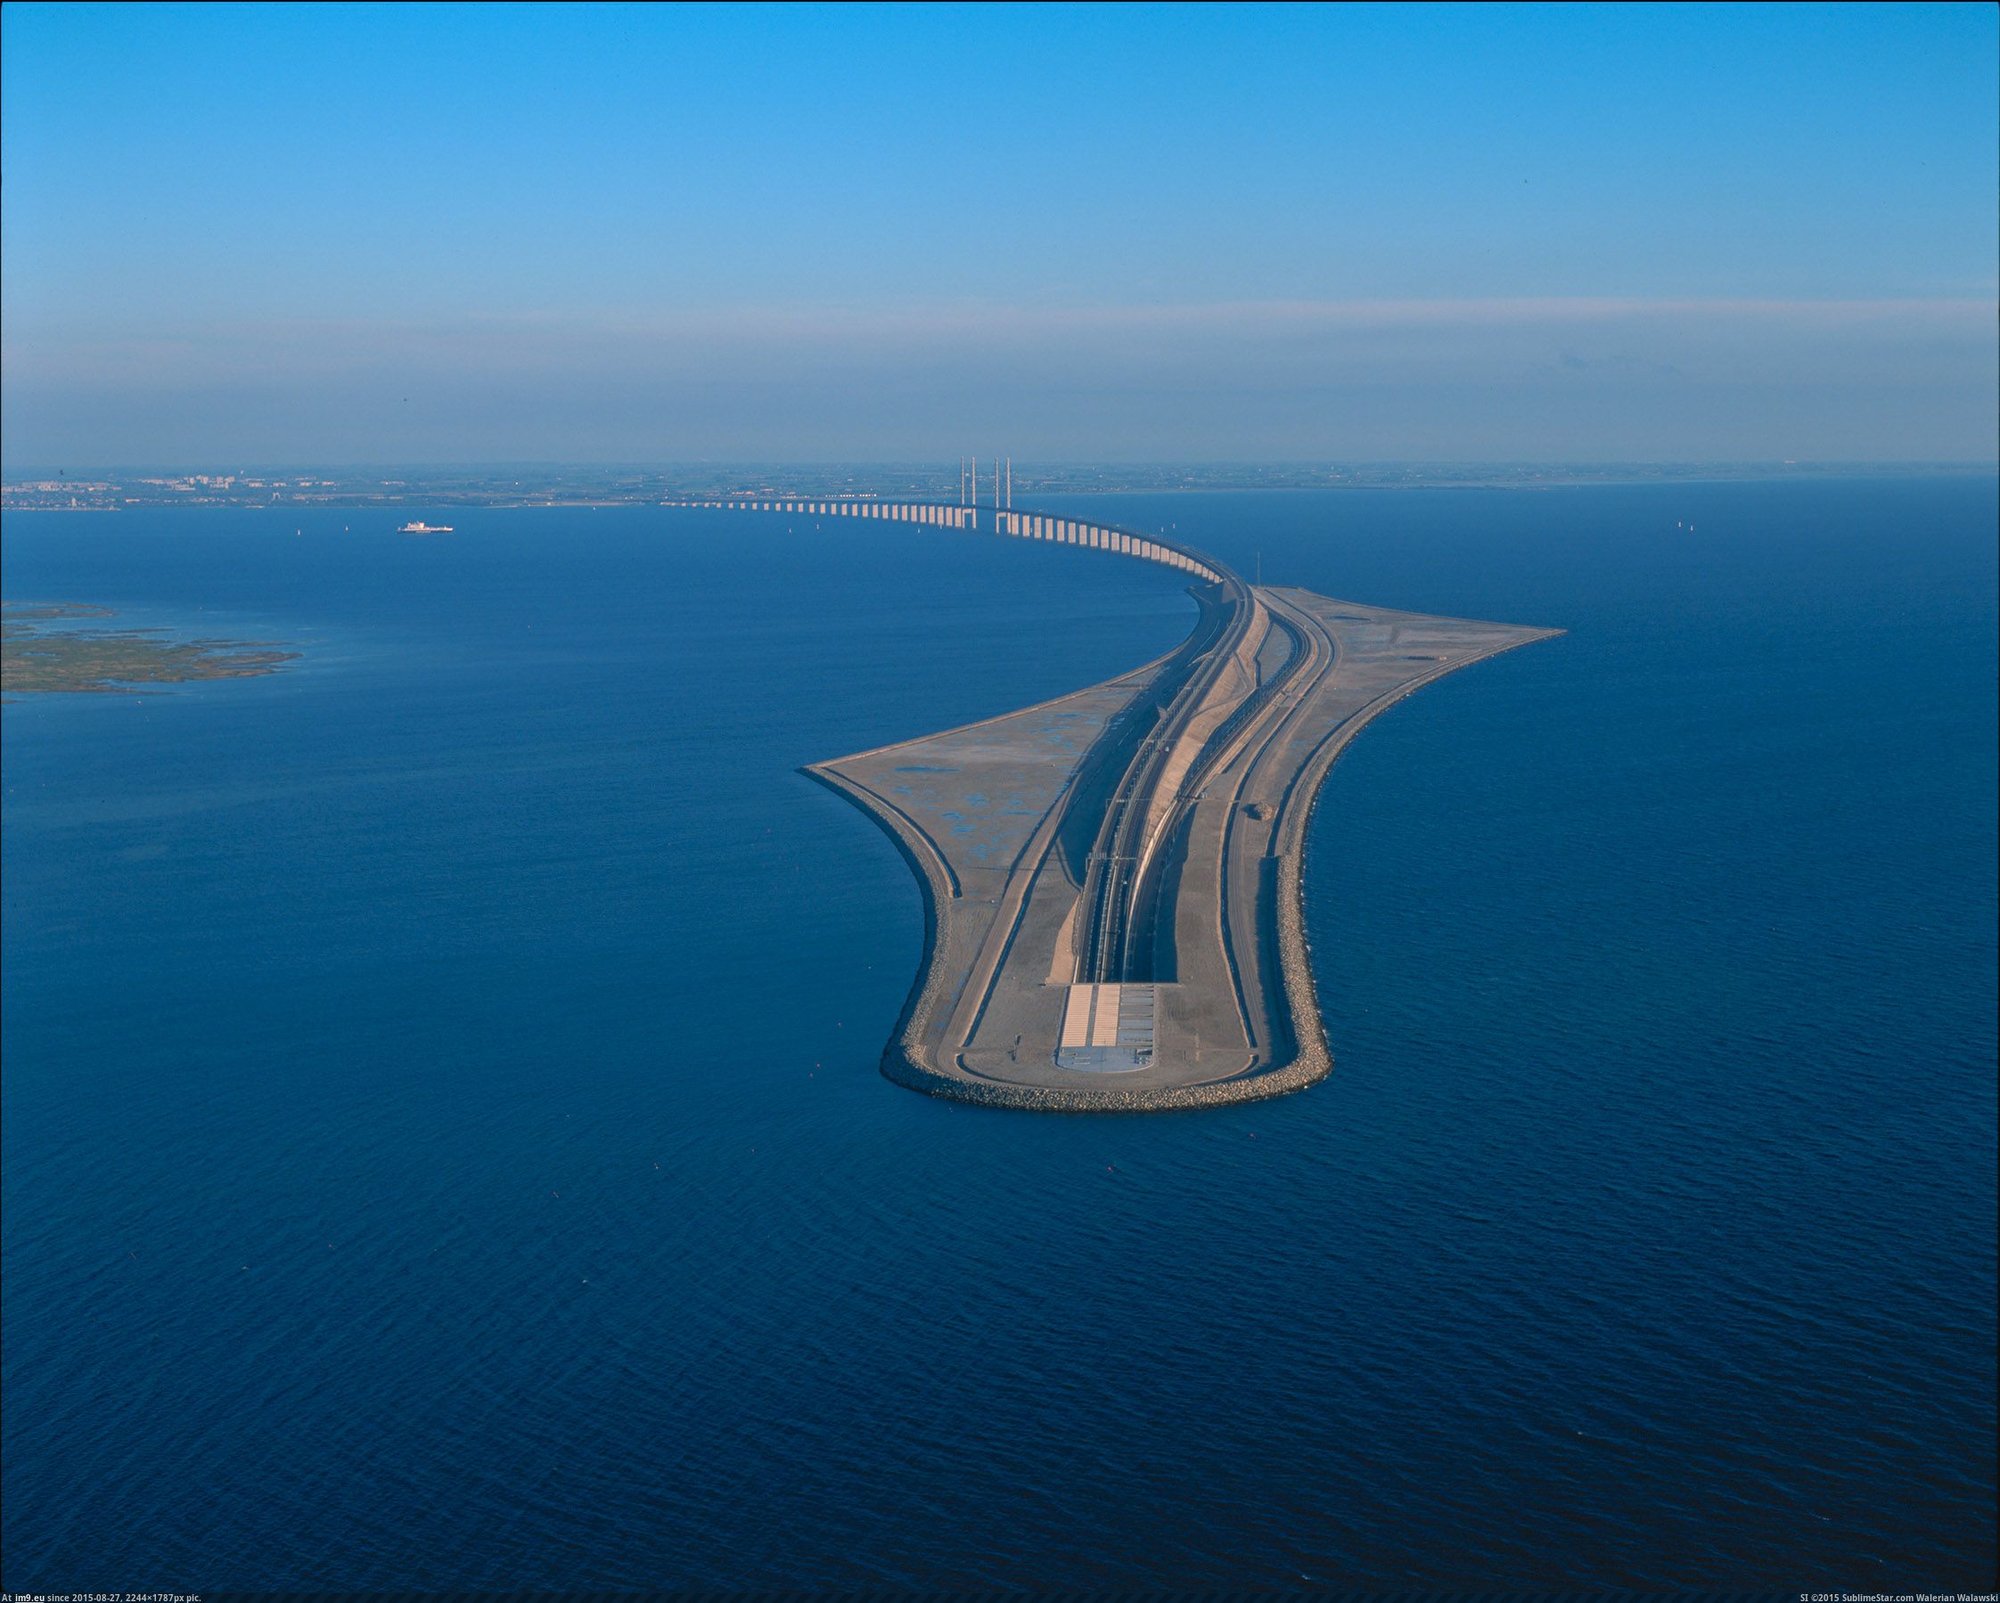 pics-the-bridge-between-denmark-and-sweden-dips-into-a-tunnel.jpg